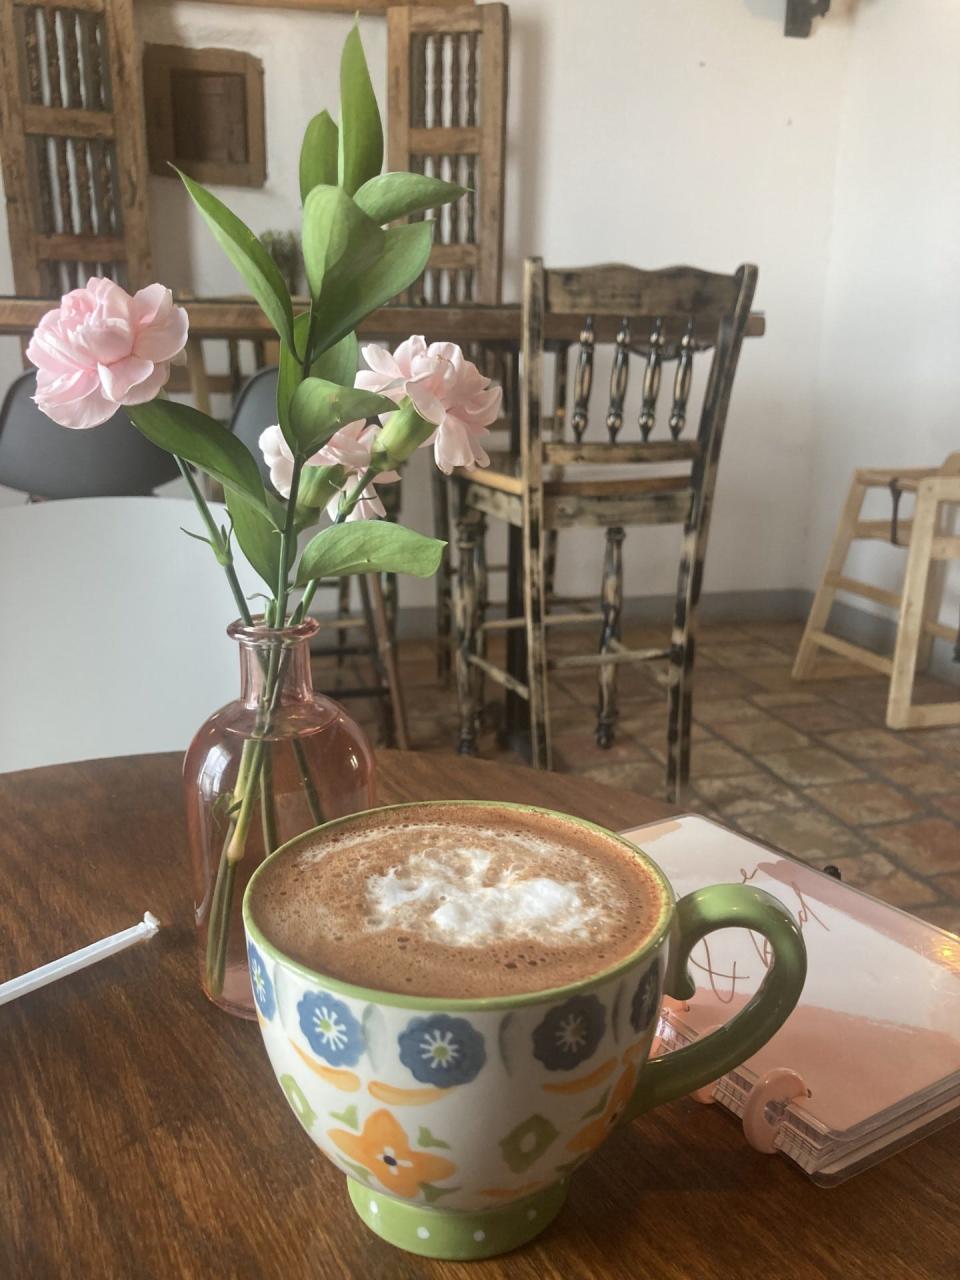 Cocol, at 10180 Socorro Rd., offers the best Abuelita chocolate latte for cool fall mornings.